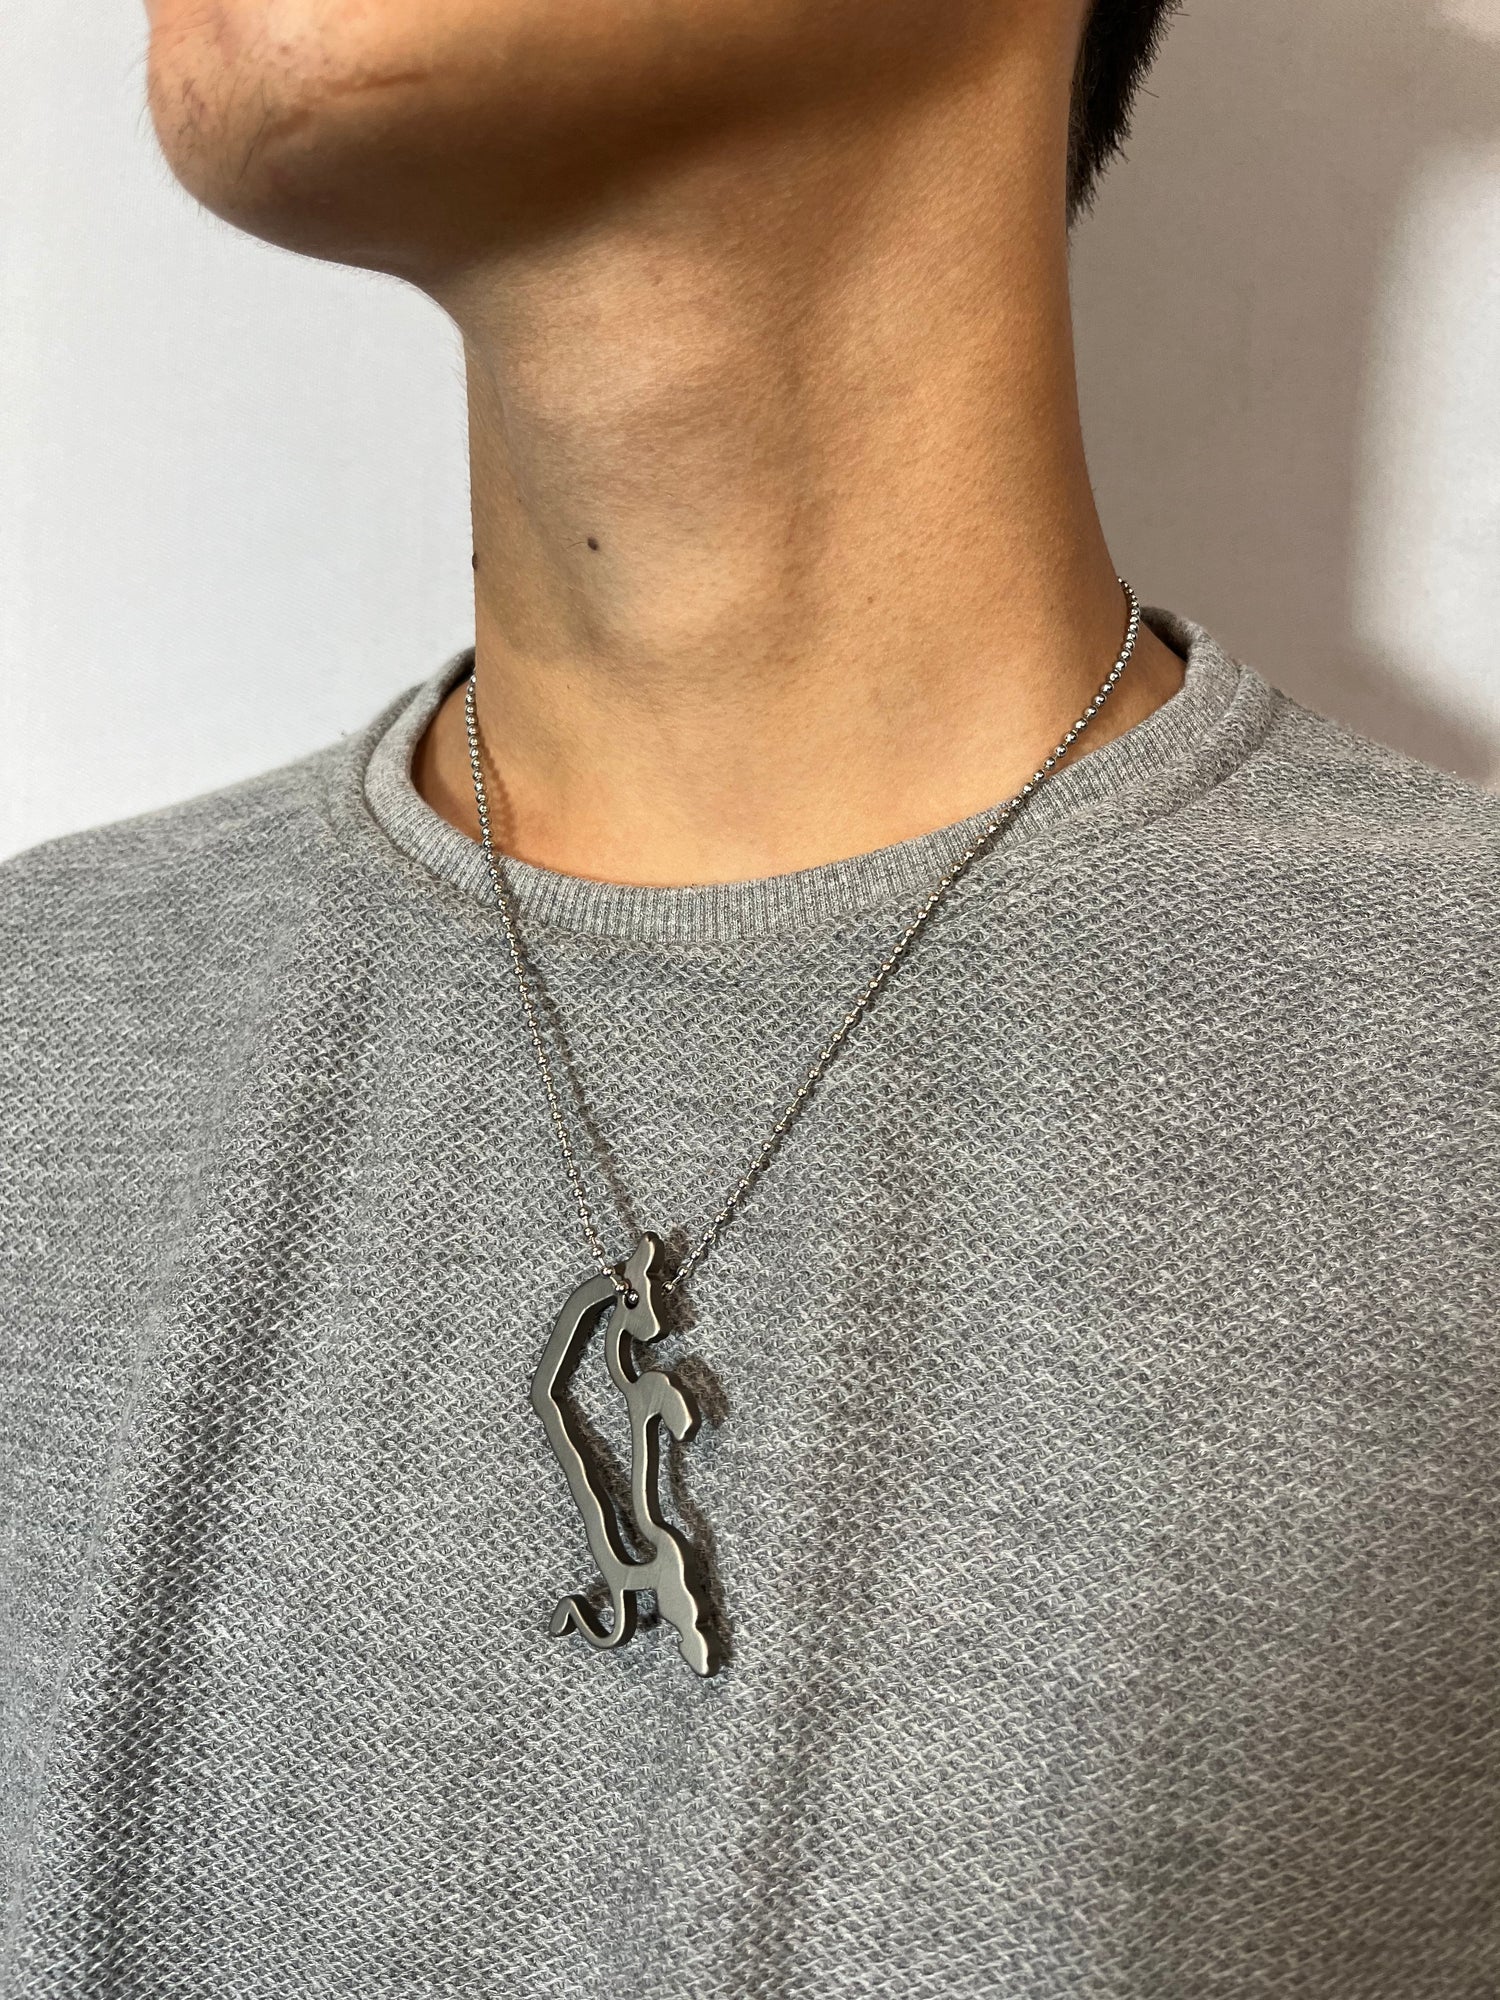 Bull Side Up Necklace